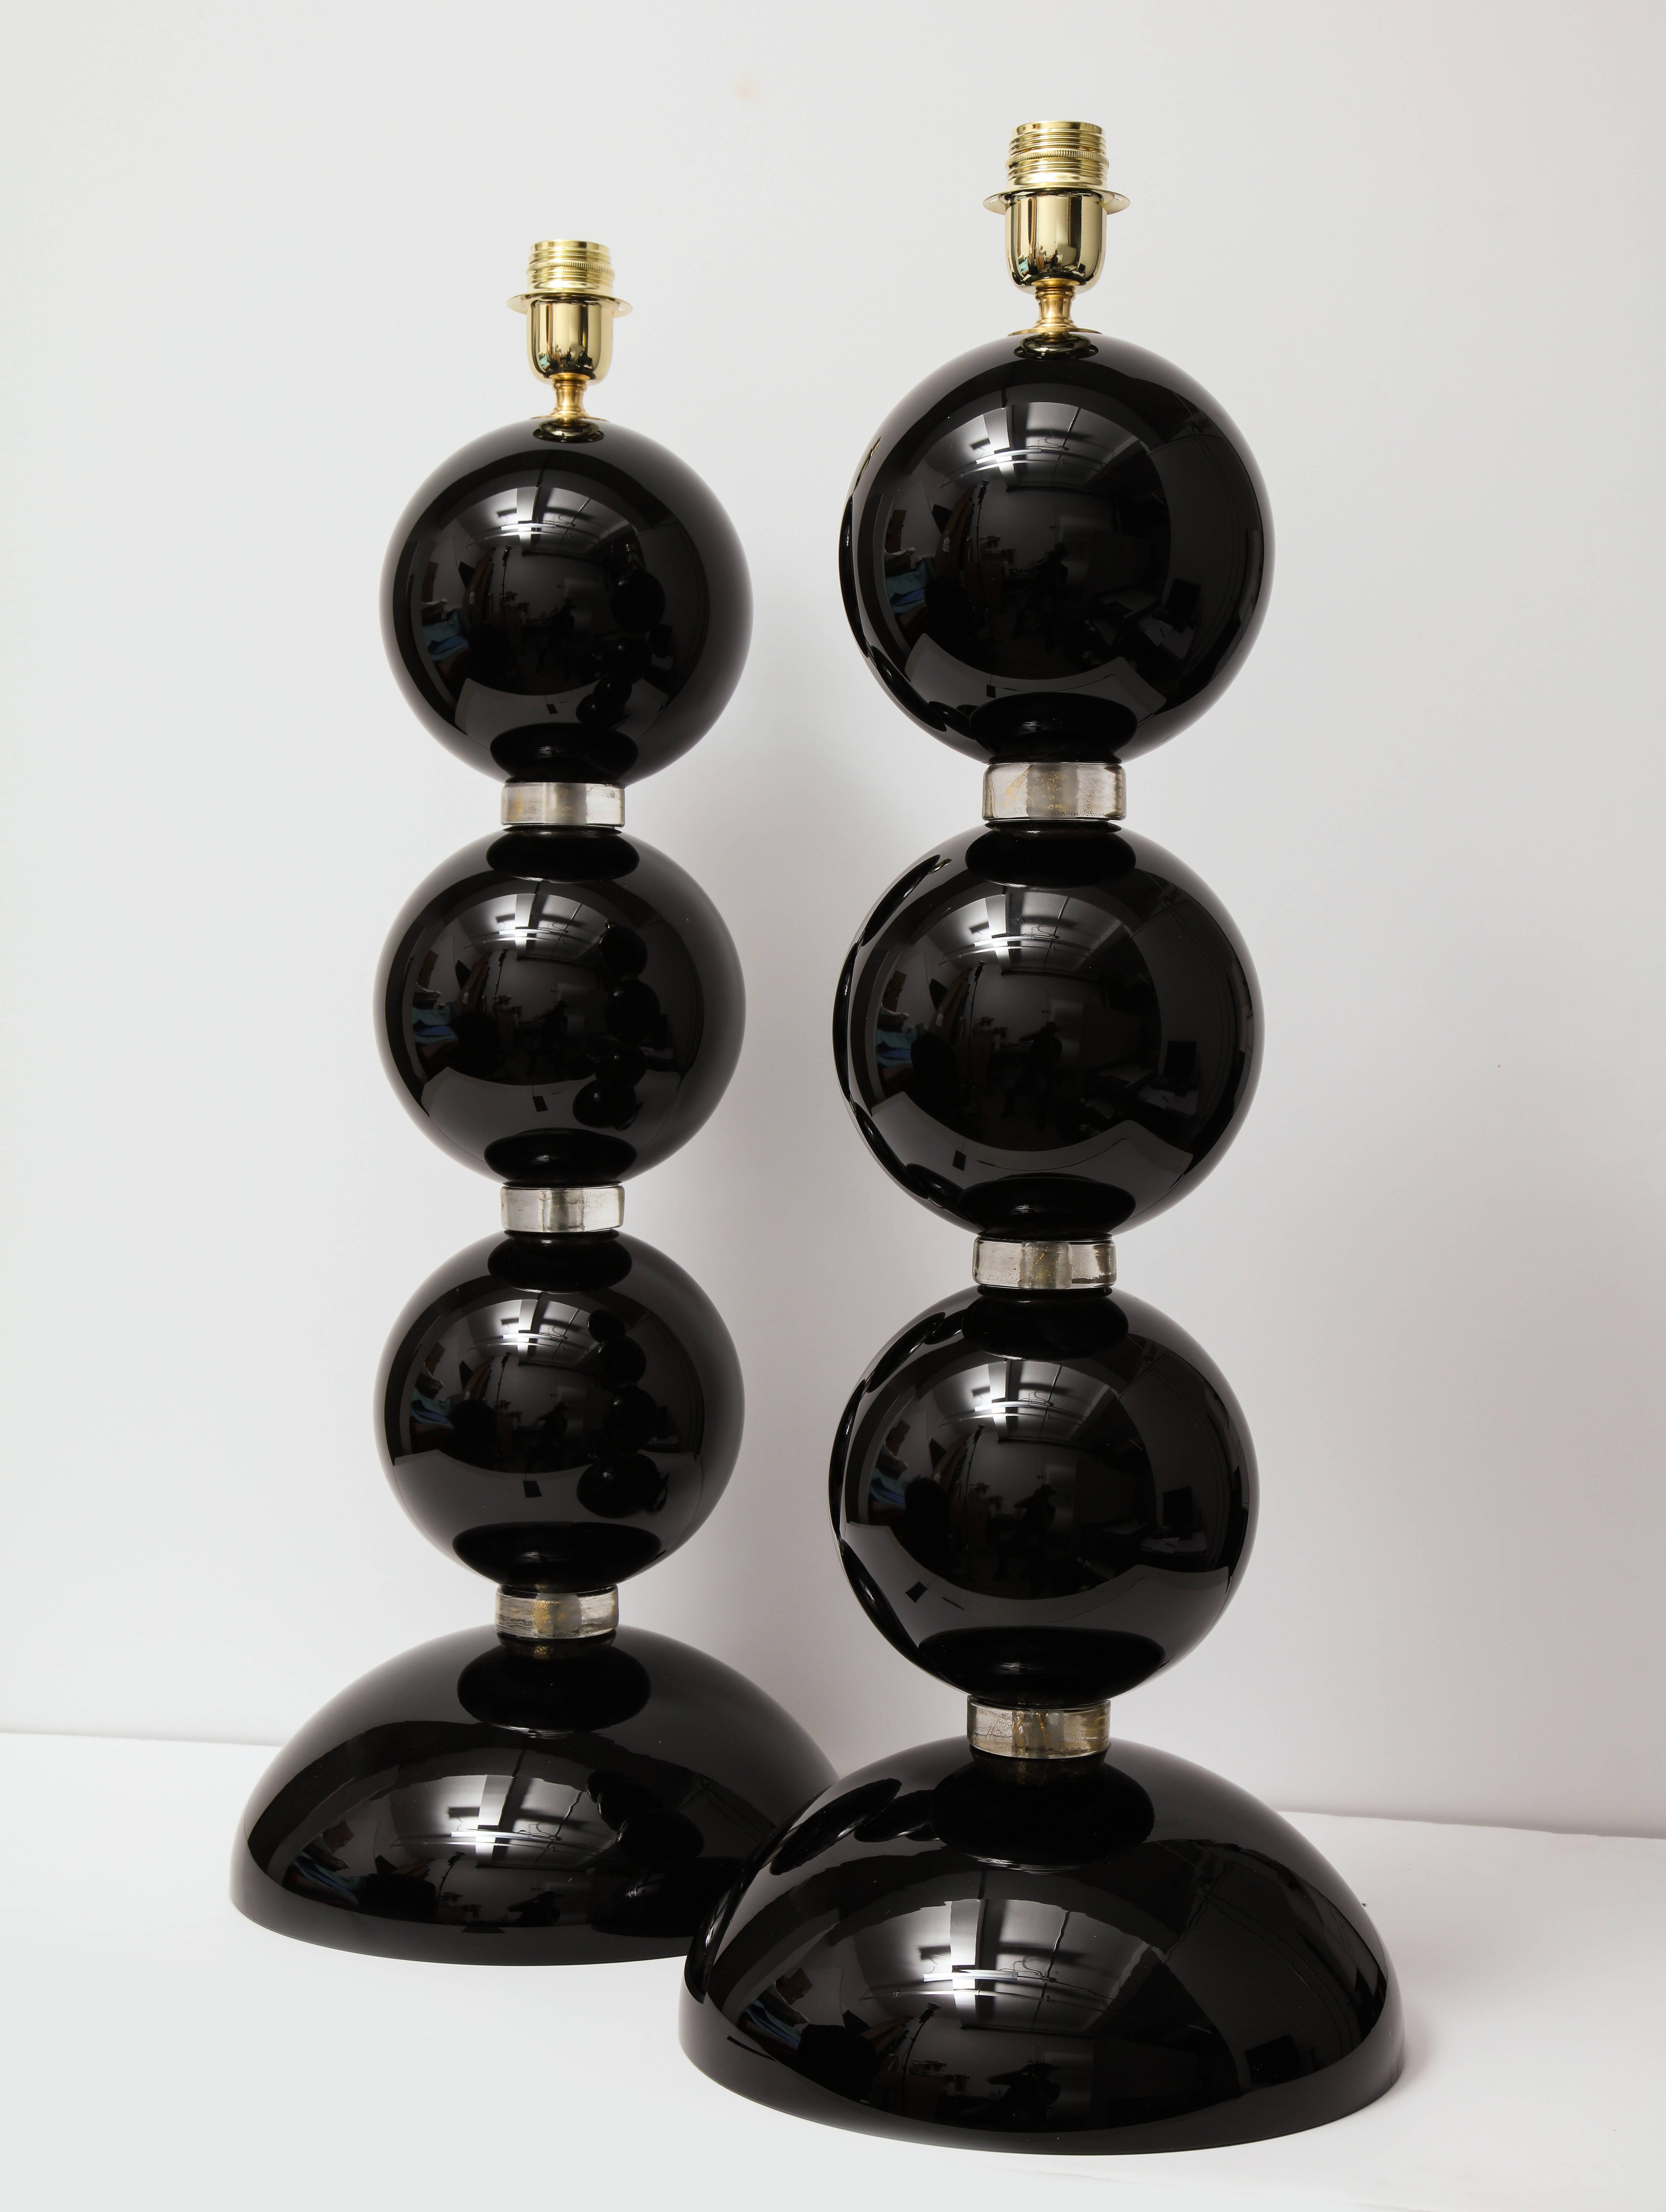 Pair of impressively large Italian hand blown Murano black and gold glass sphere lamps. Solid black Murano glass spheres are separated by clear glass rings infused with 23-karat gold flecks, giving them a shimmering jeweled look. Signed by the glass